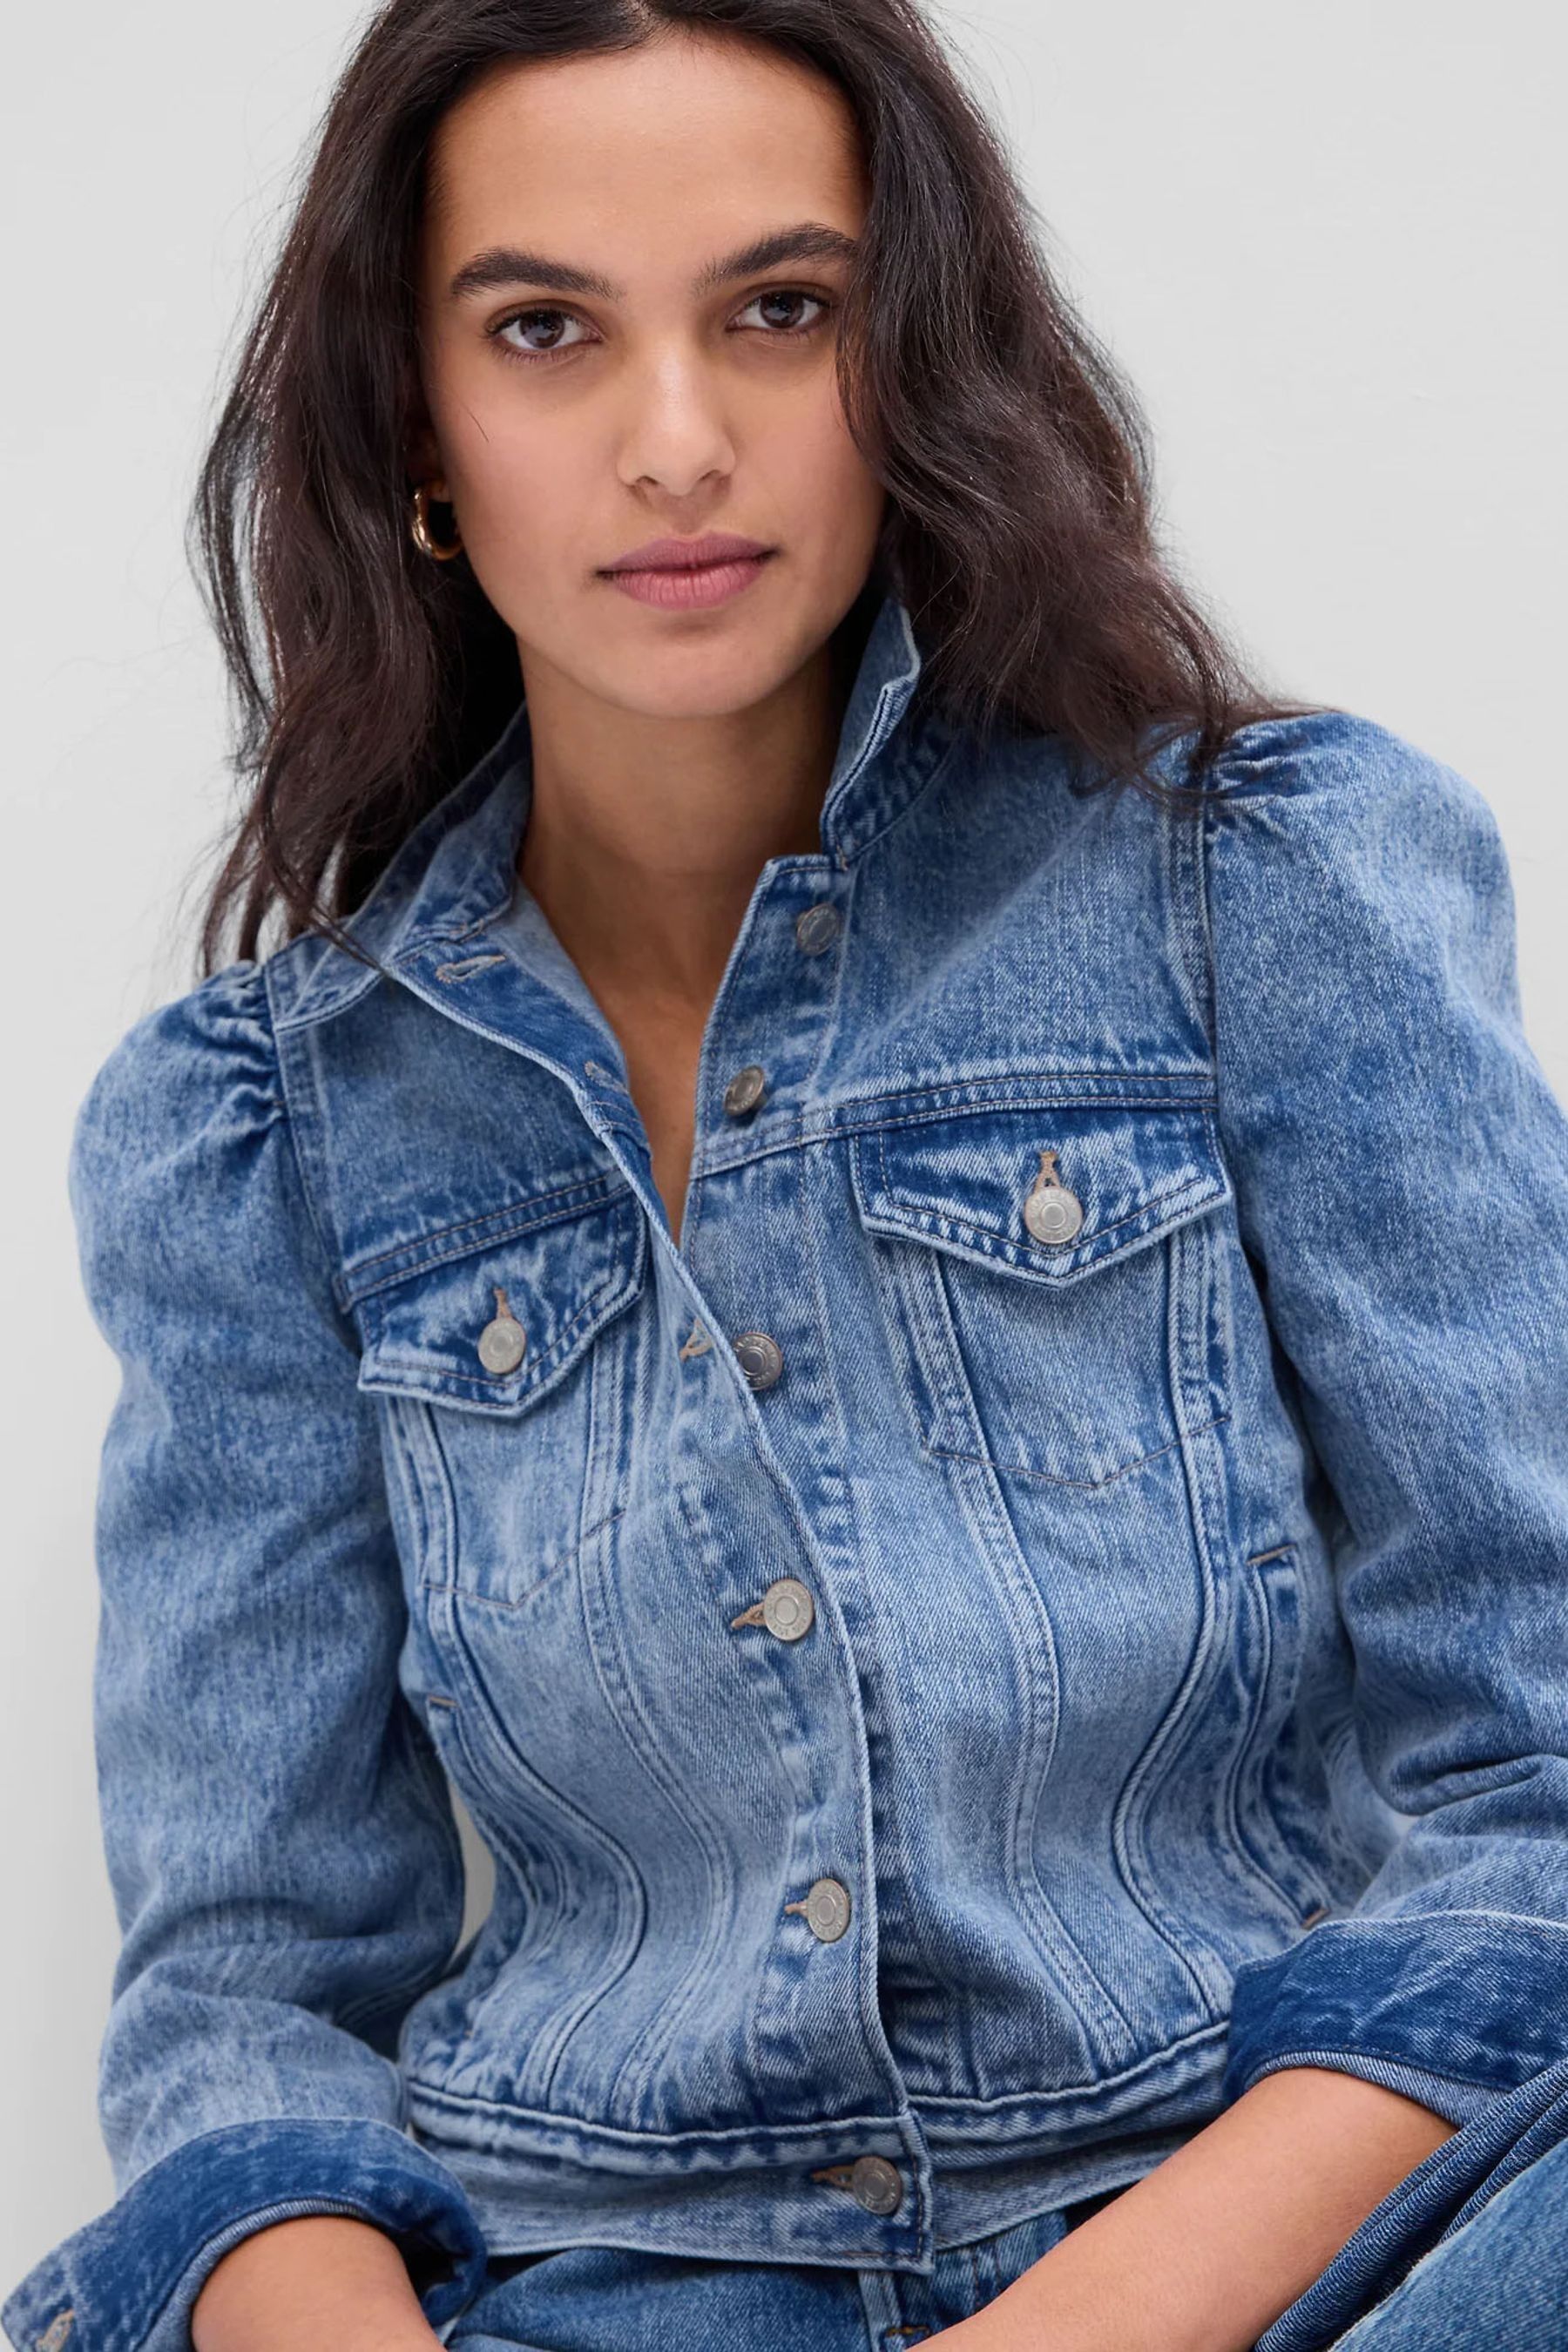 Buy Blue Puff Sleeve Denim Jacket from the Gap online shop